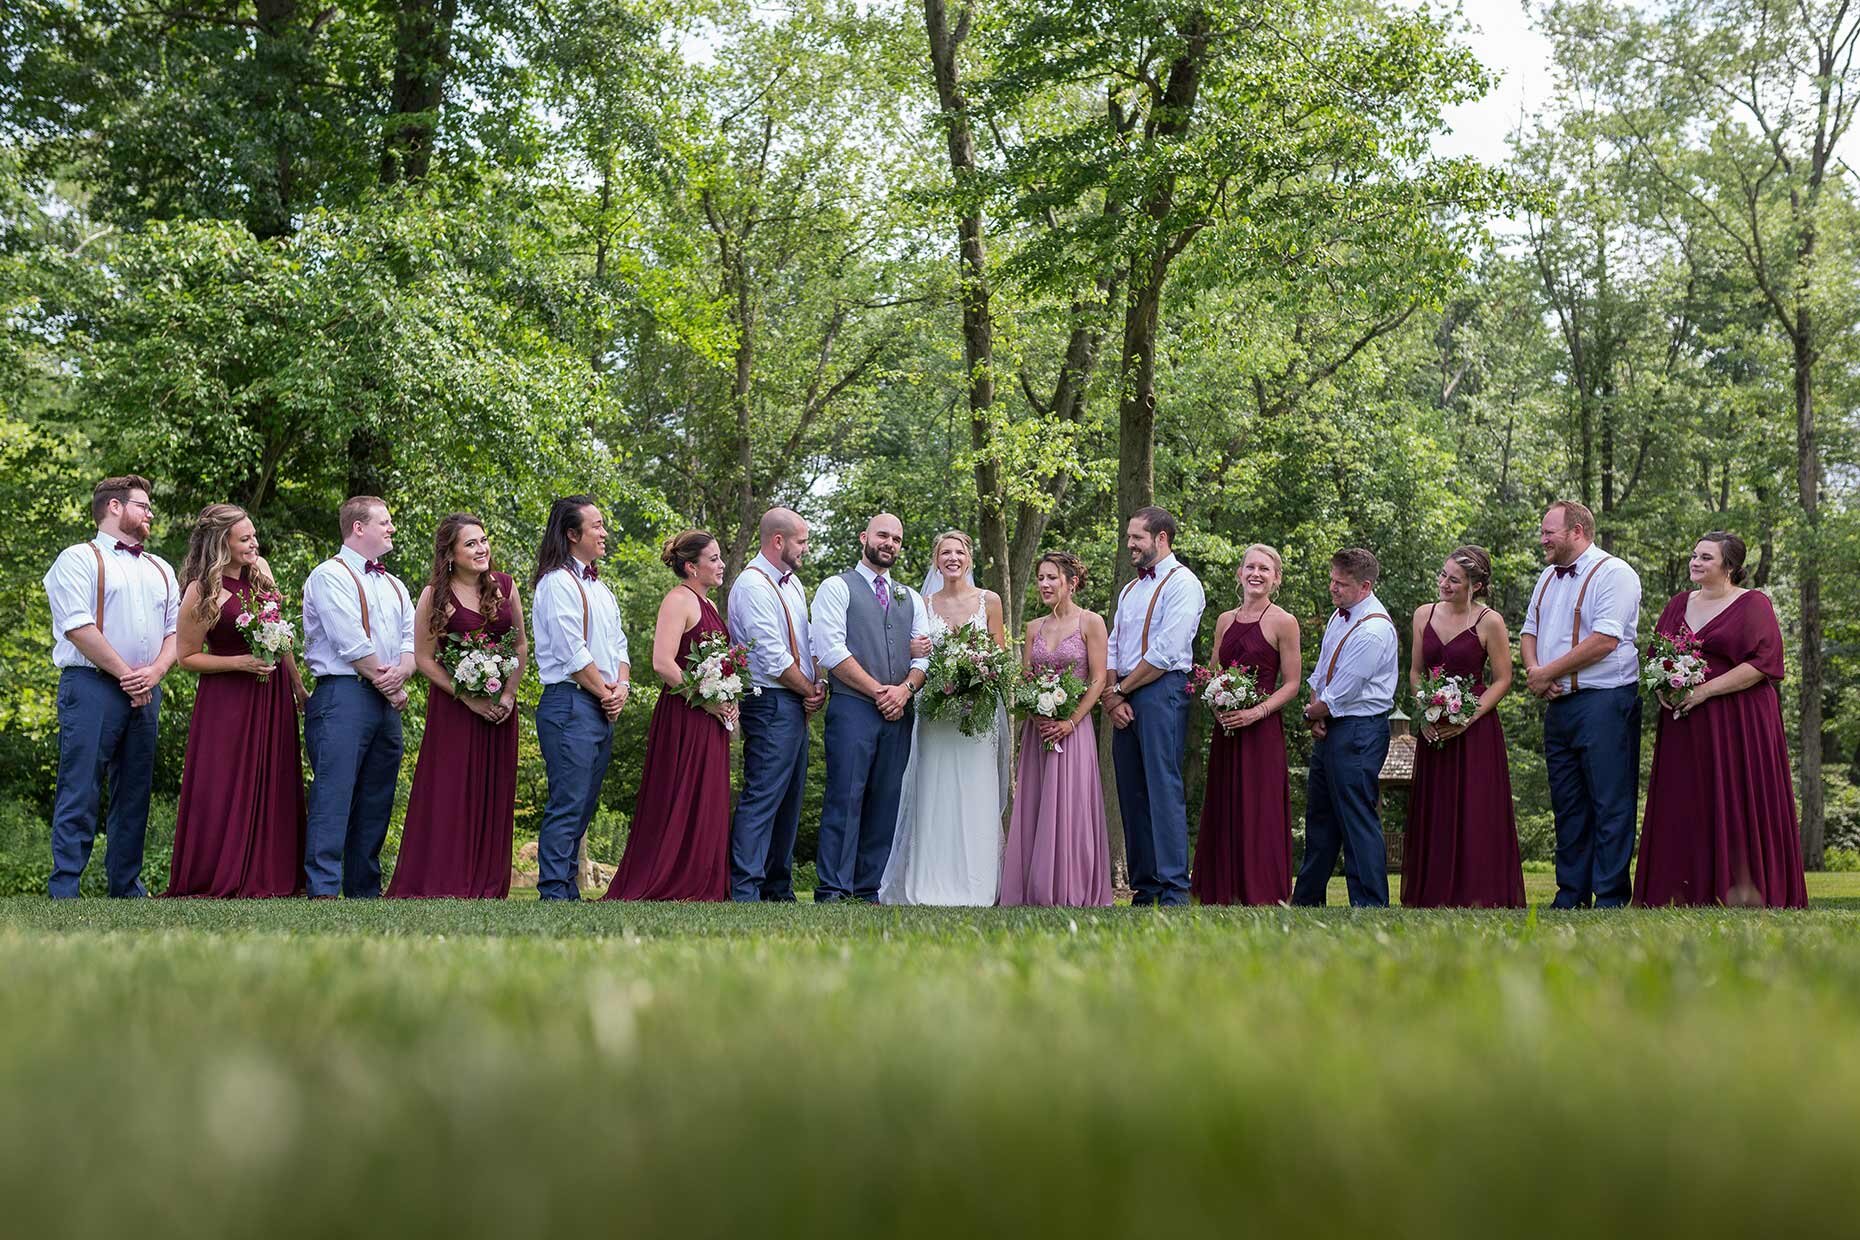 Bridal Party with grass up close and out of focus